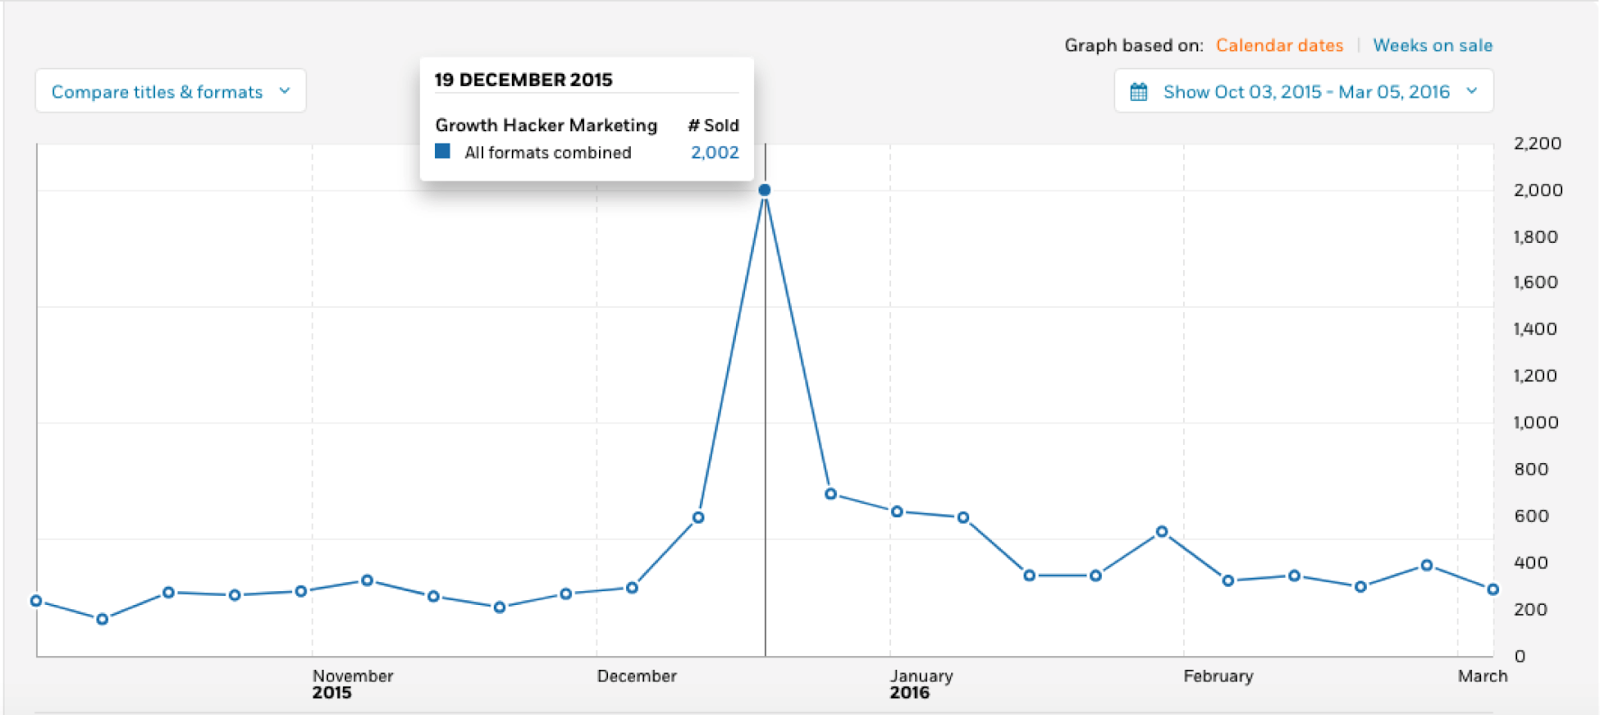 The sales of Growth Hacker Marketing